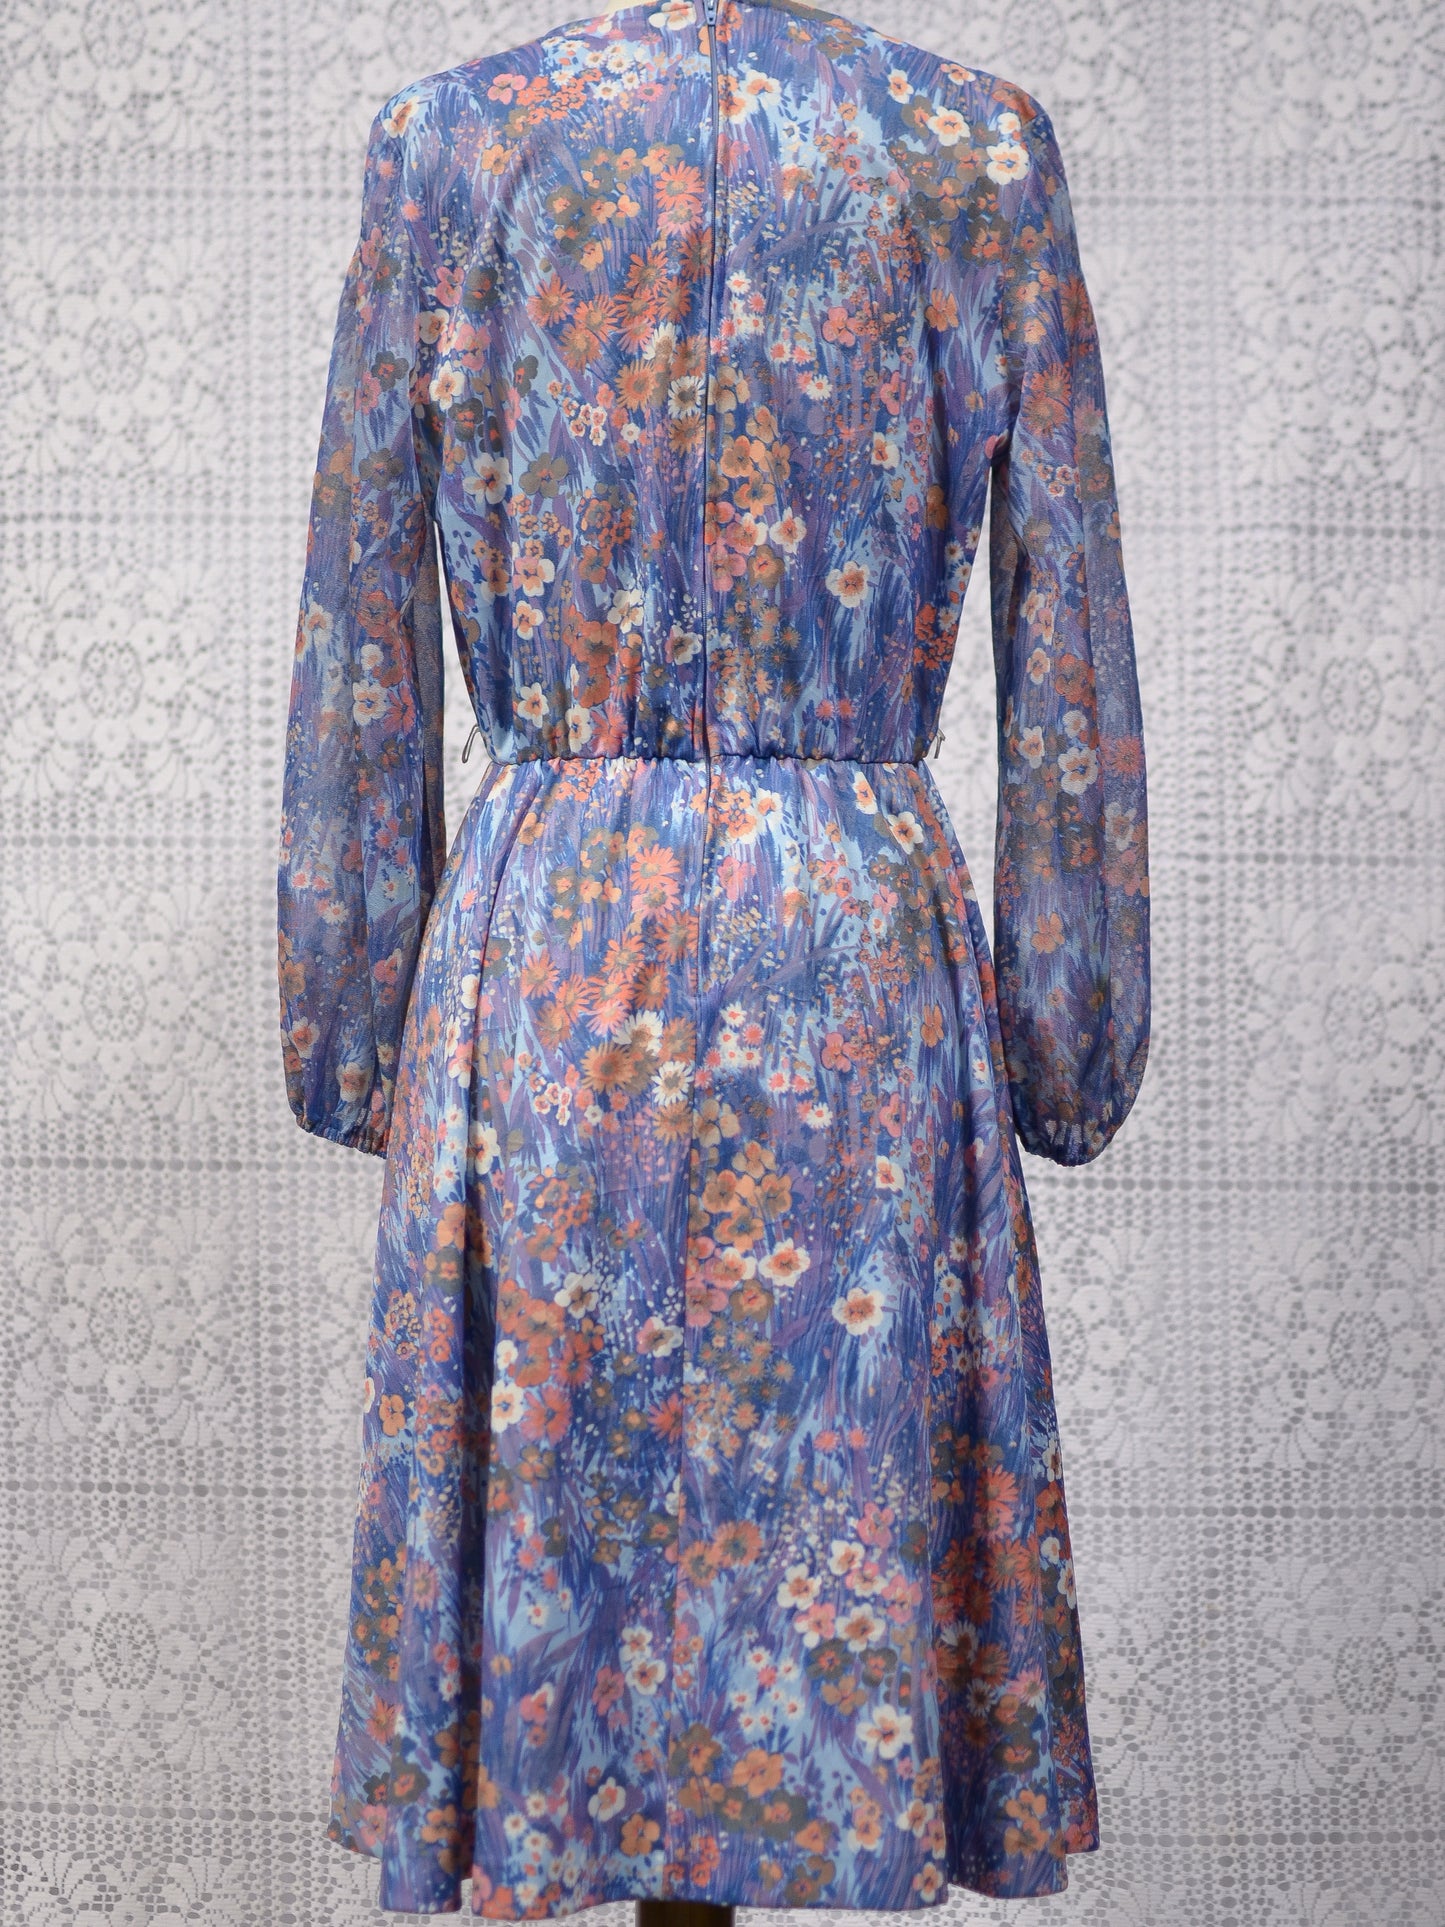 1970s blue and orange floral fit and flare dress with balloon sleeves